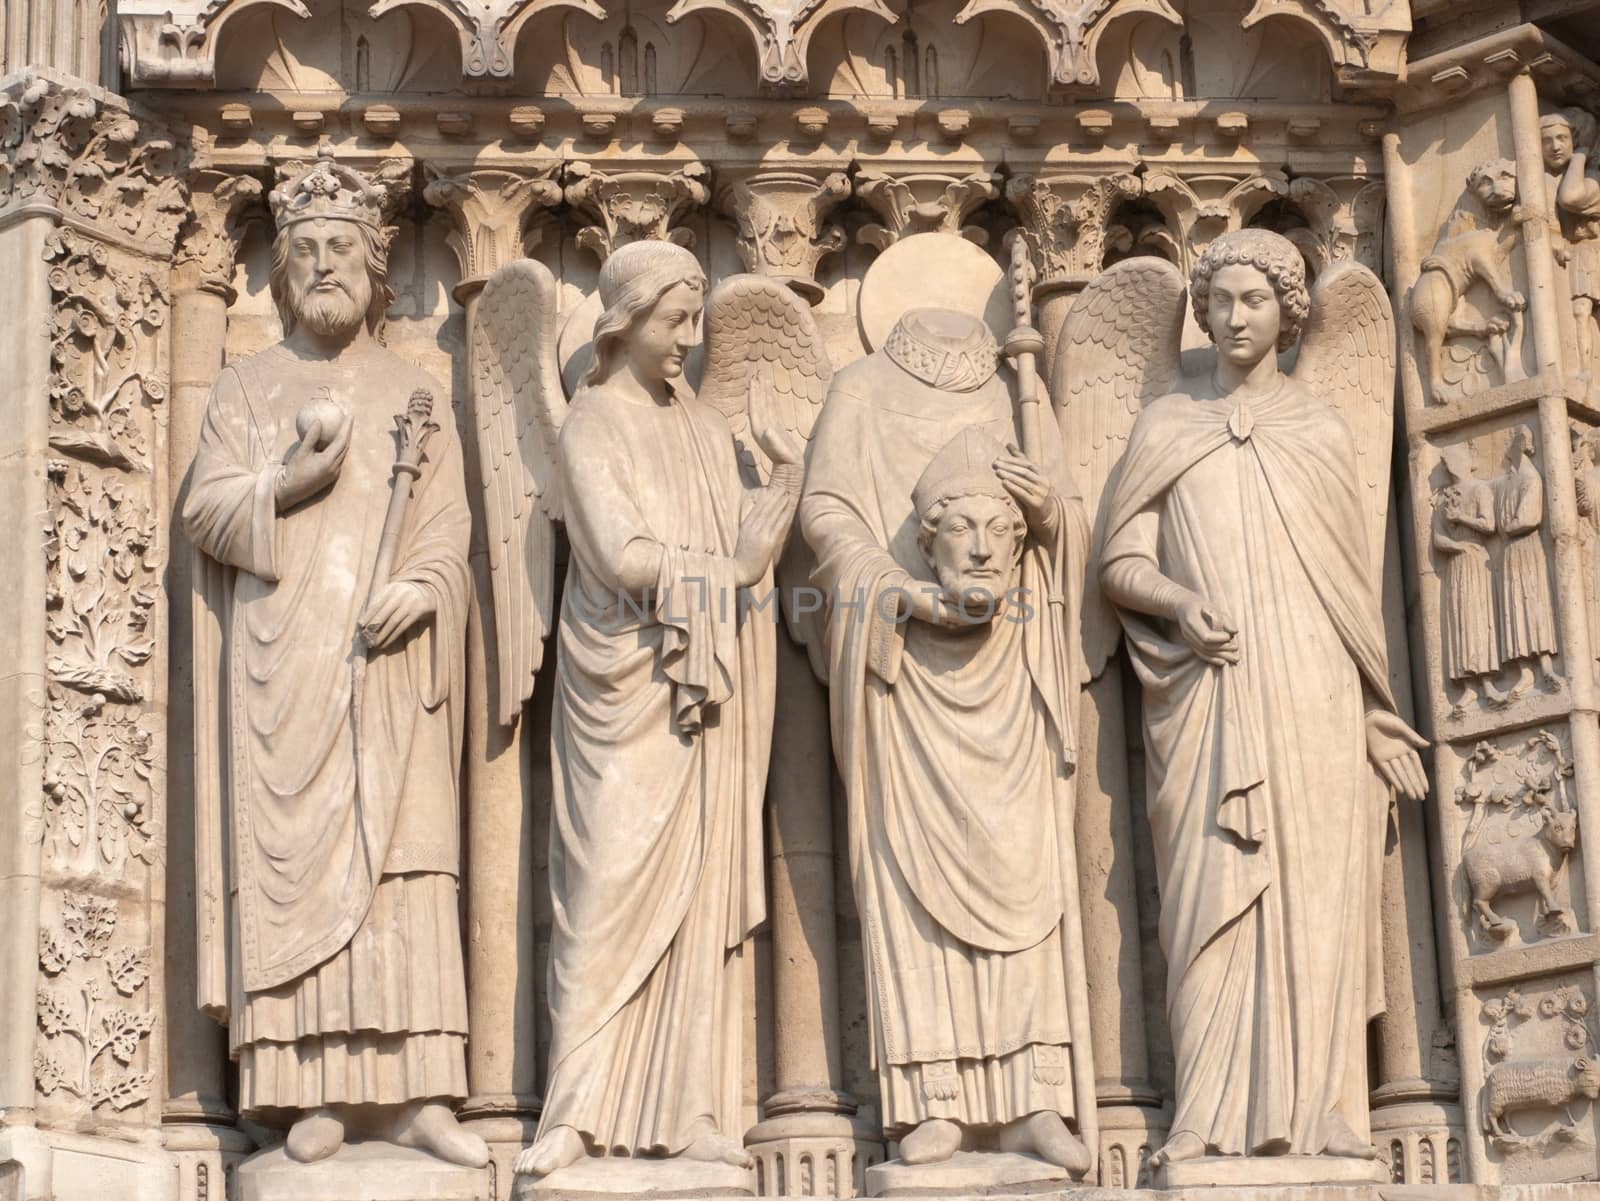 Fragment from the facade of Notre Dame Paris